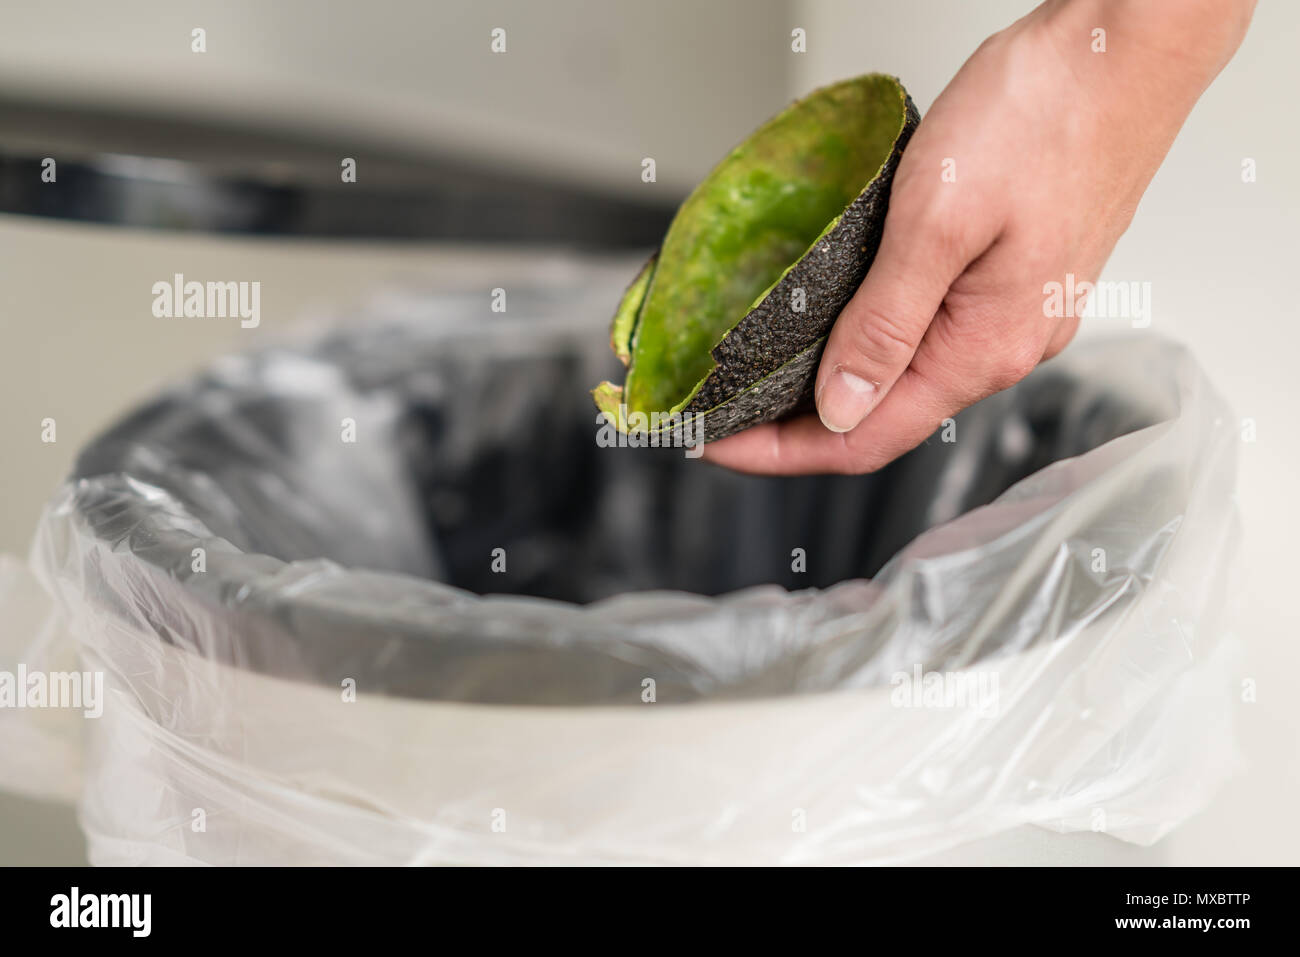 Woman dumping organic trash into the garbage can. Stock Photo